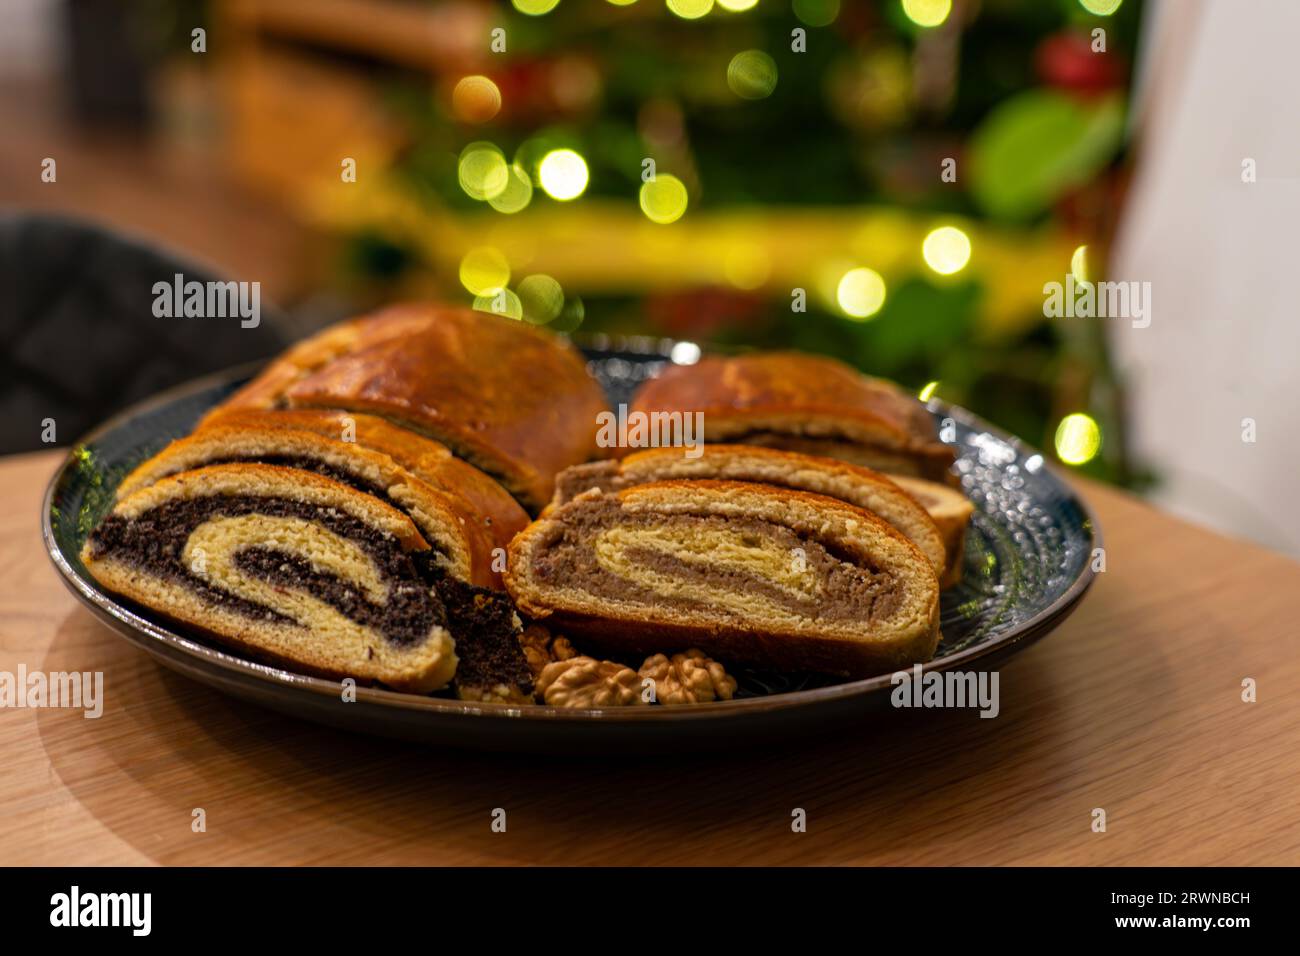 traditional hungarian christmas cookie calles bejgli filled with walnut and poppy seed with christmas tree background . Stock Photo